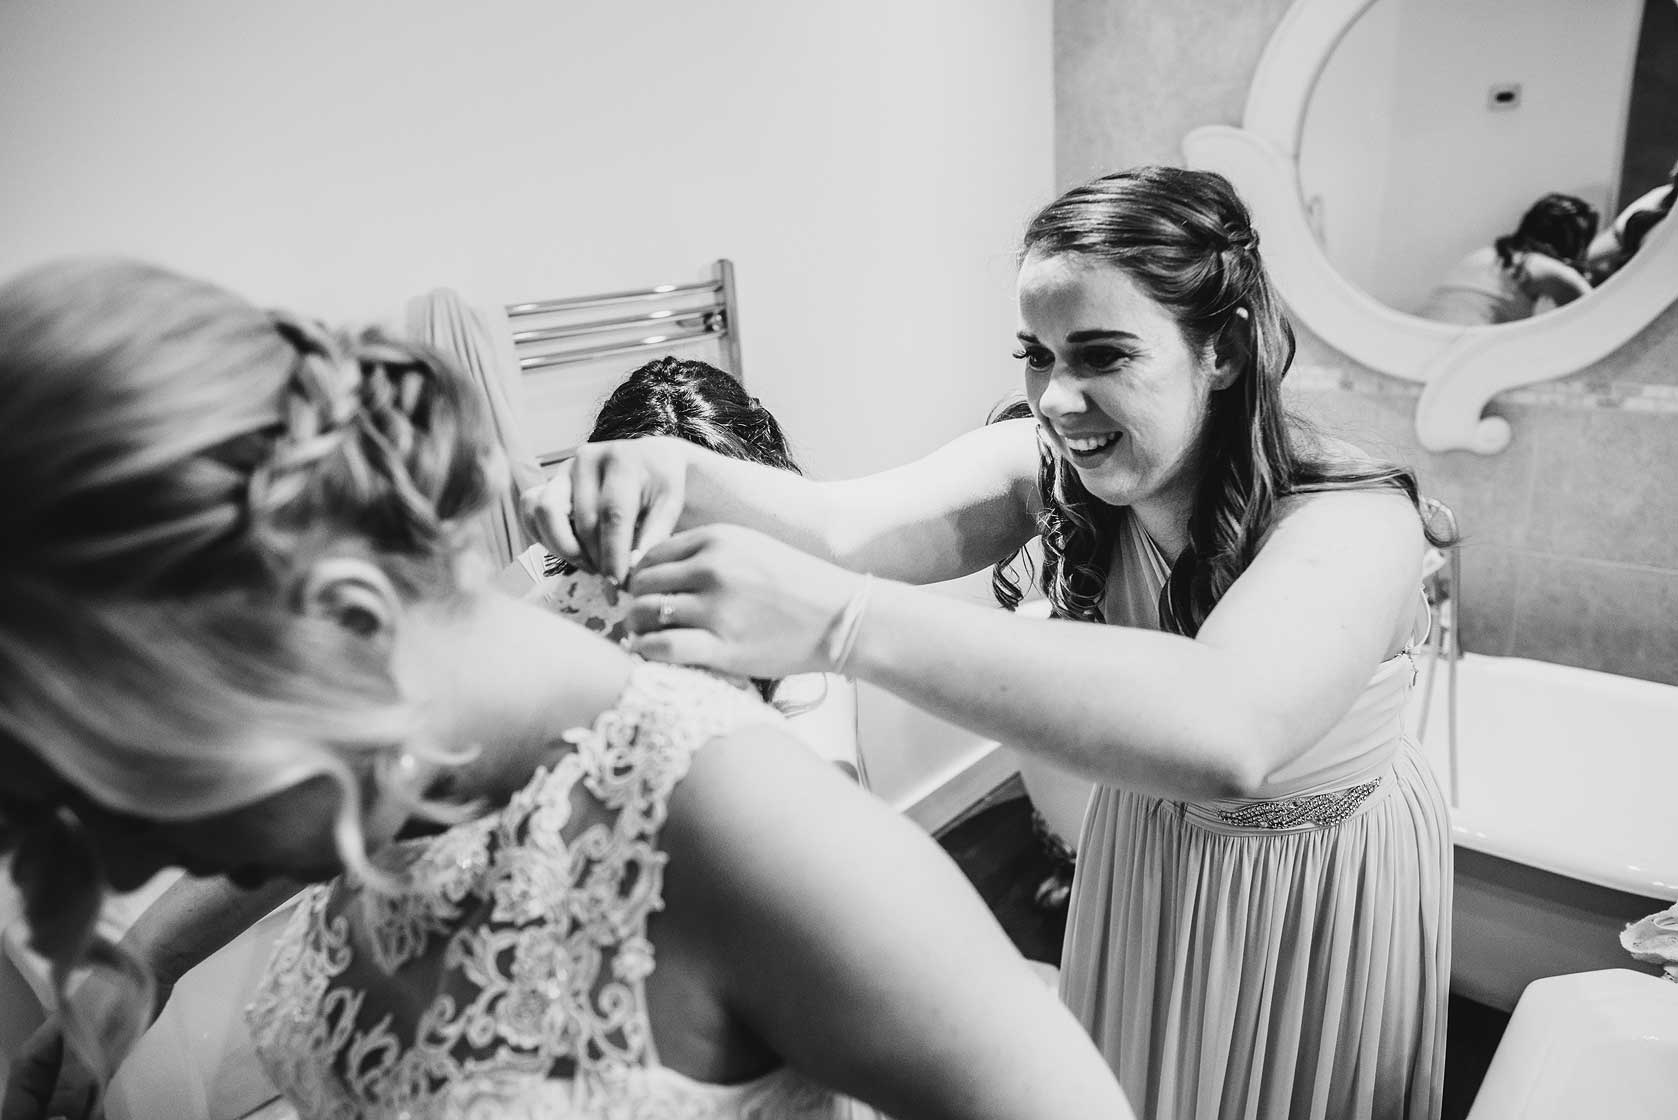 Reportage Wedding Photography at Cotswold House Hotel